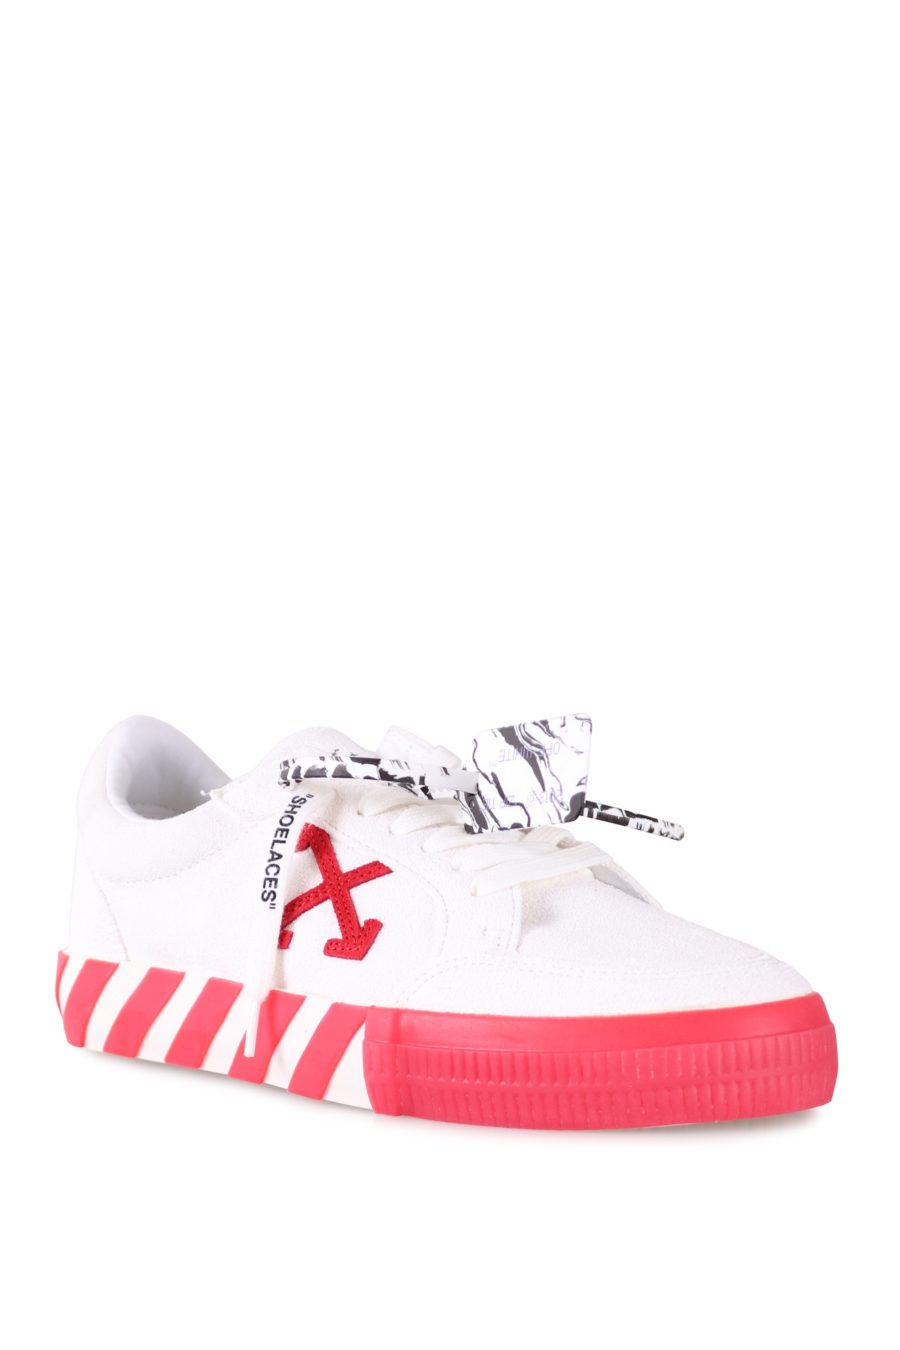 Trainers Off-White white with red - eefee4183939d940002463307f8362d91940cdc5